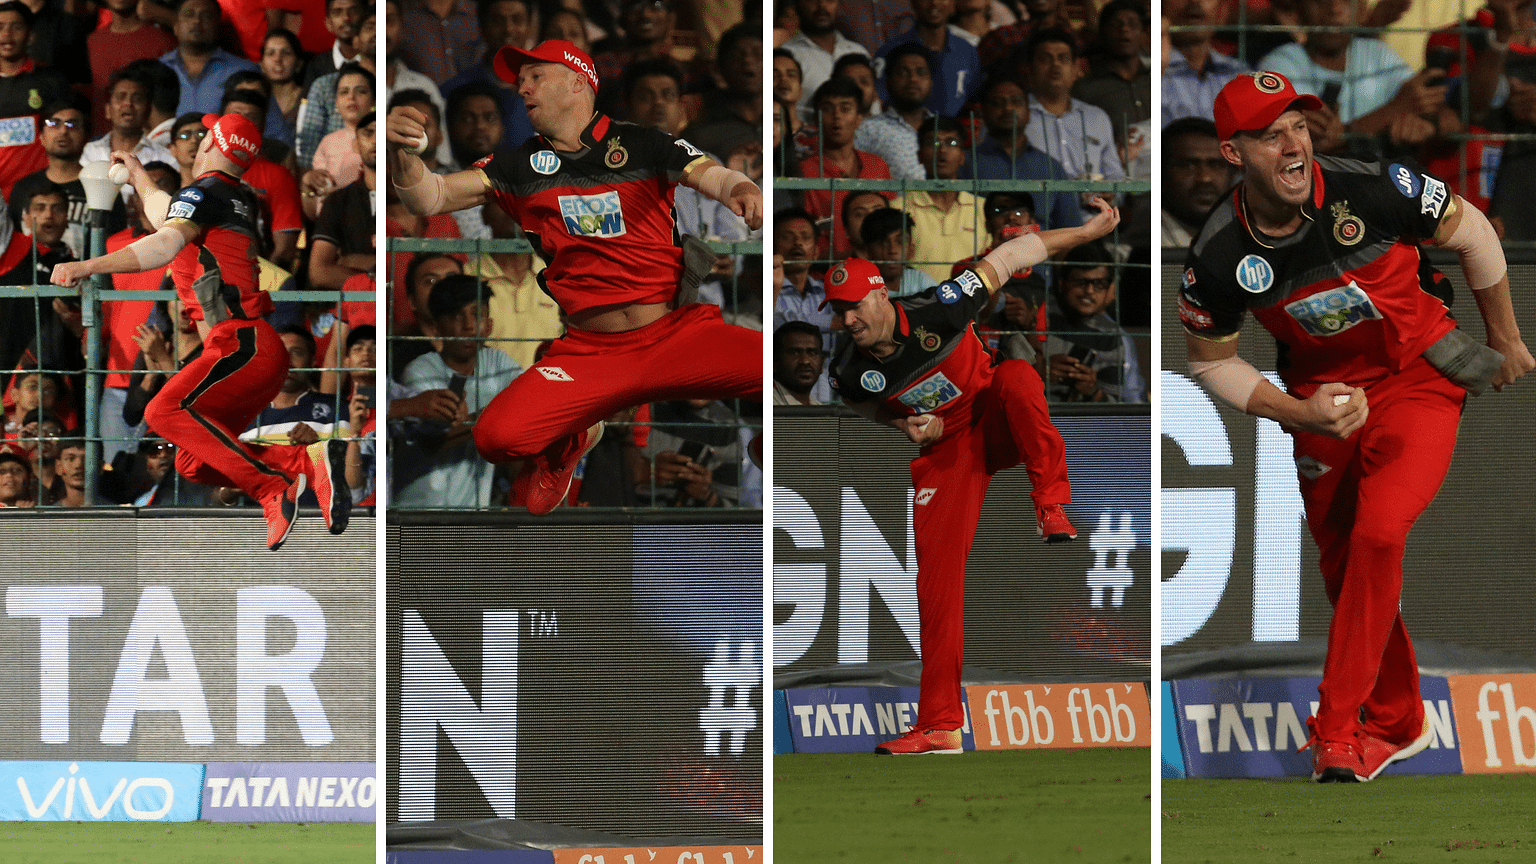 AB de Villiers took a leaping catch on the edge of the boundary line to pack off Alex Hales.